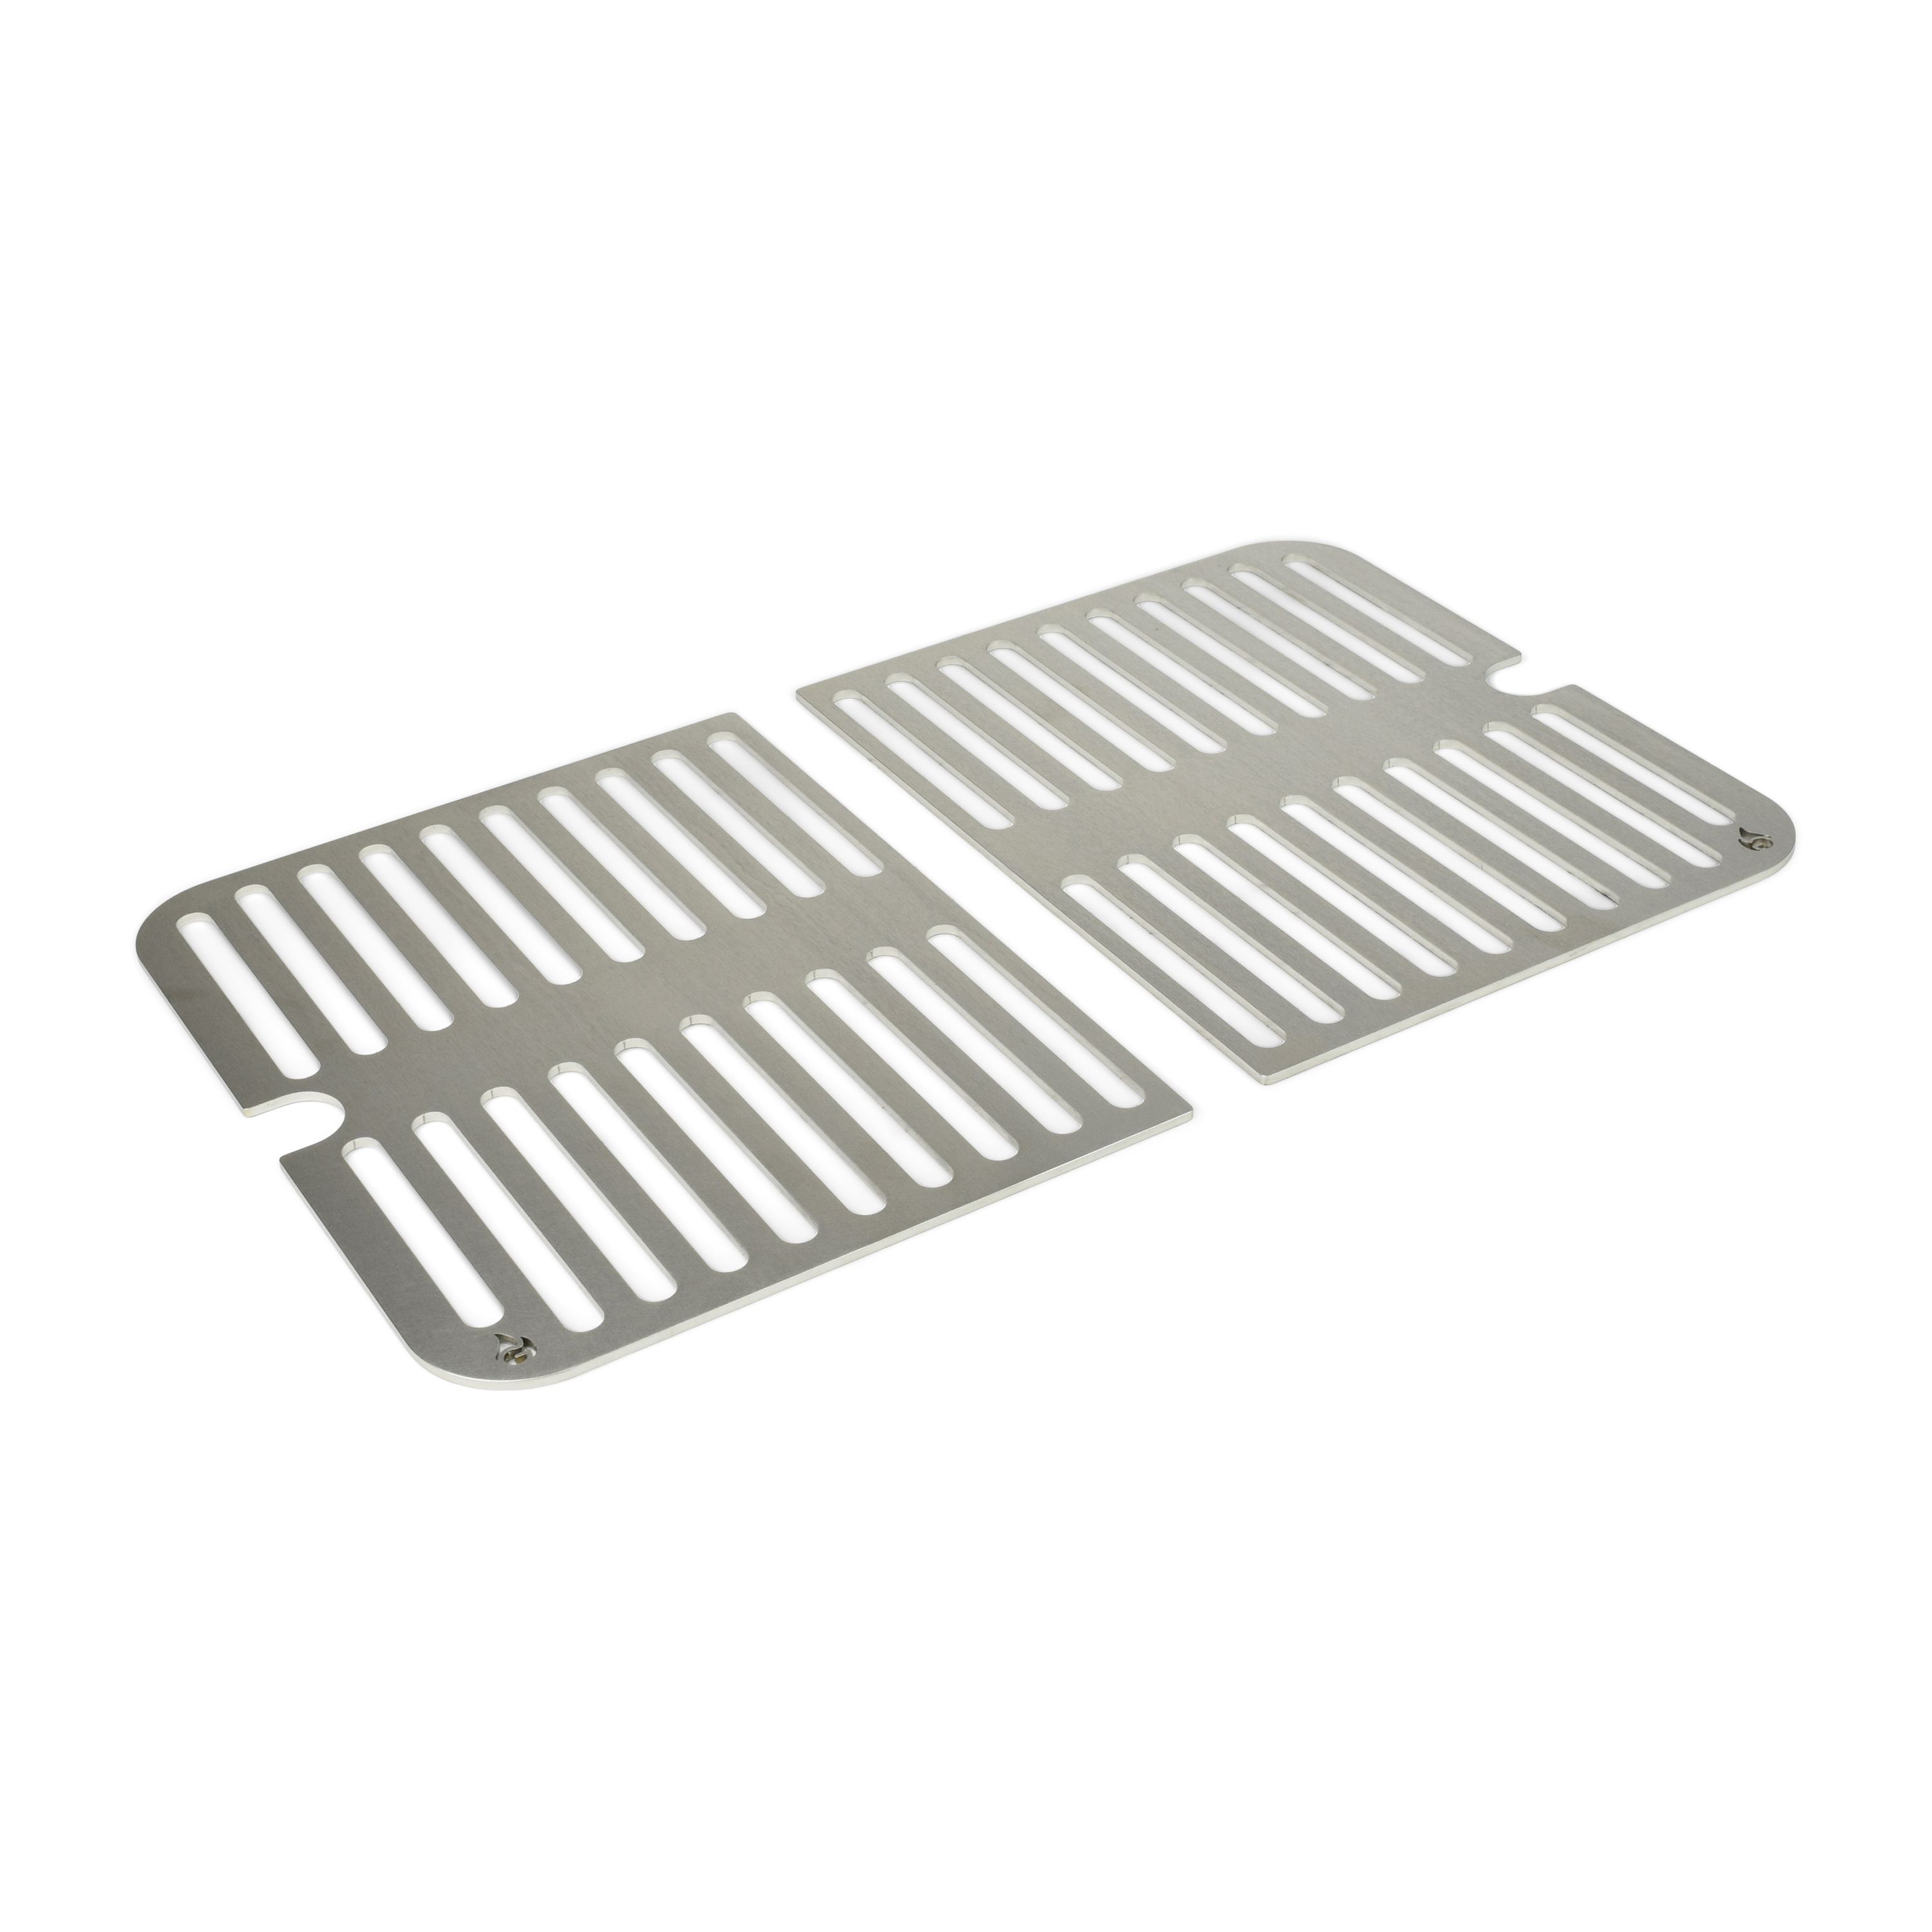 Stainless steel GRILL ROD for Weber Go Anywhere Replacement grate - set of 2 grates